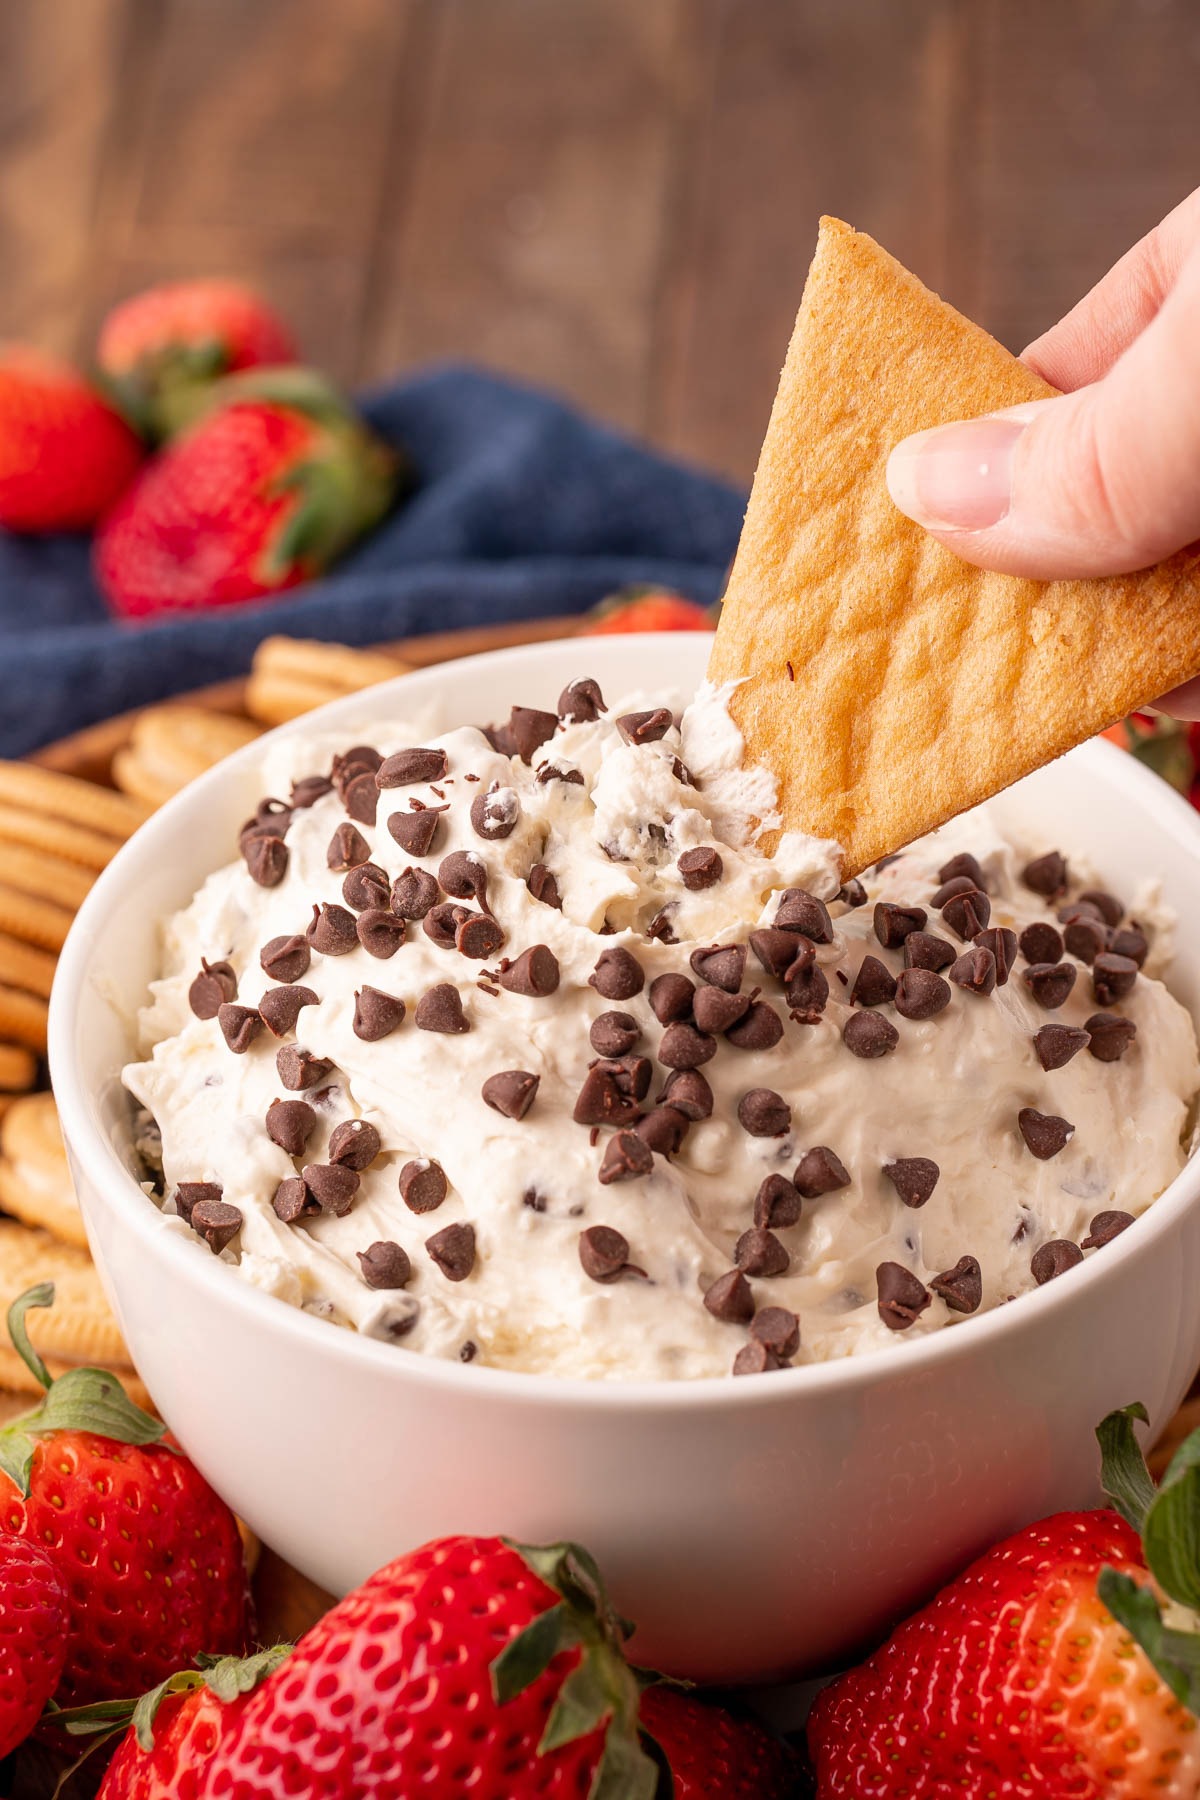 A woman's hand dipping a cookie in a bowl of booty dip.